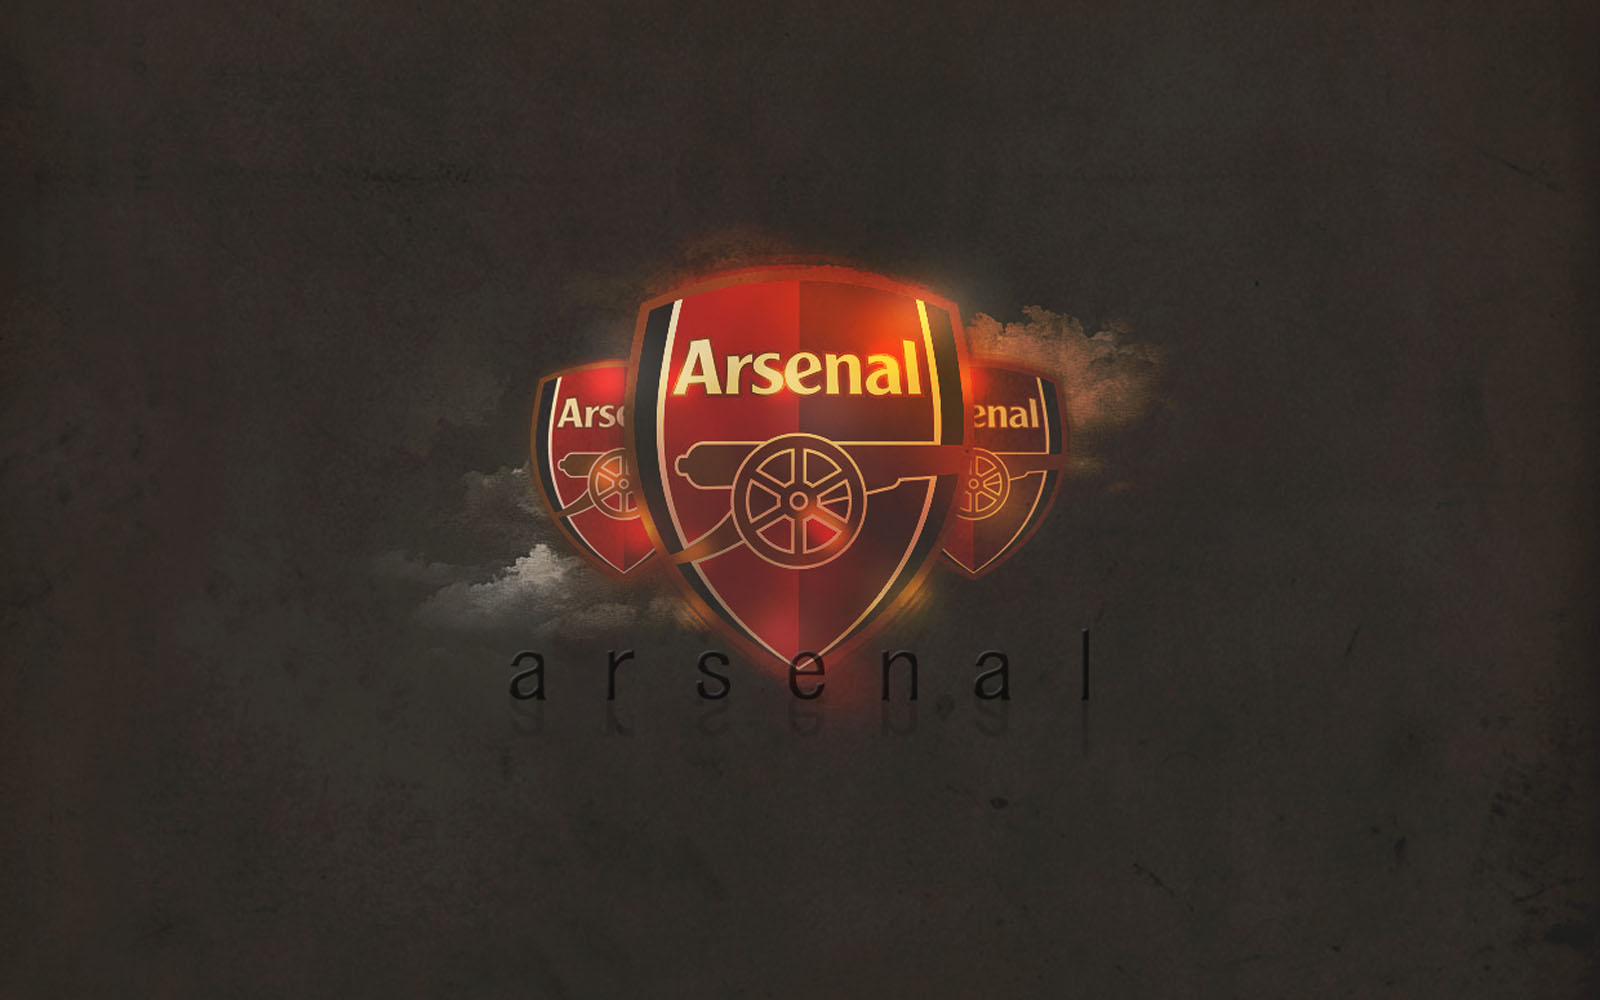 Tag Arsenal Wallpaper Background Photos Image Andpictures For